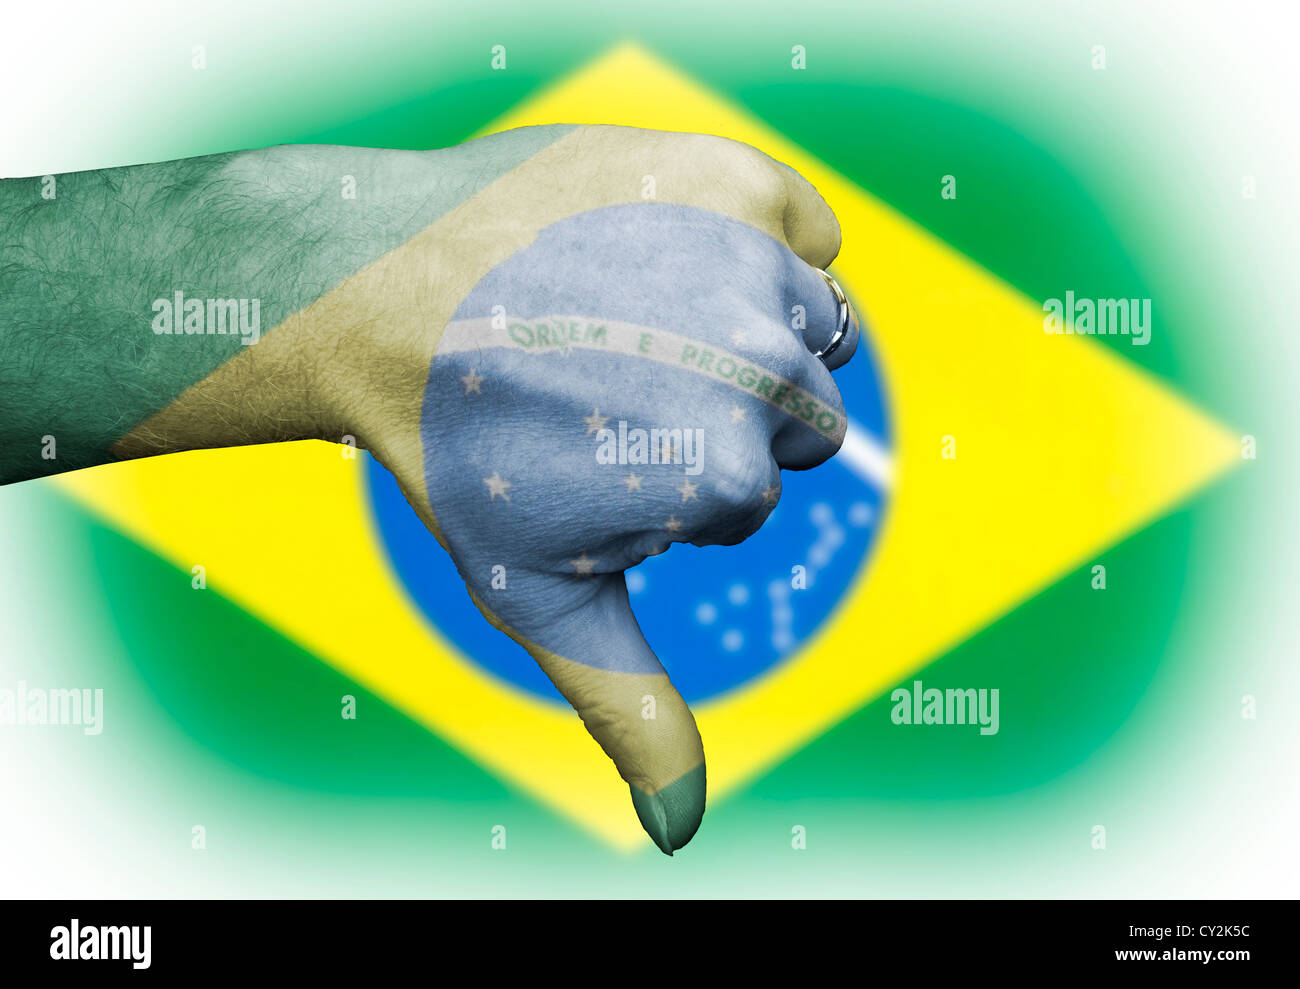 Thumbs down to the Brazilians Brazil, sporting metaphor in rugby football all national sports team and derogatory slur people. Stock Photo